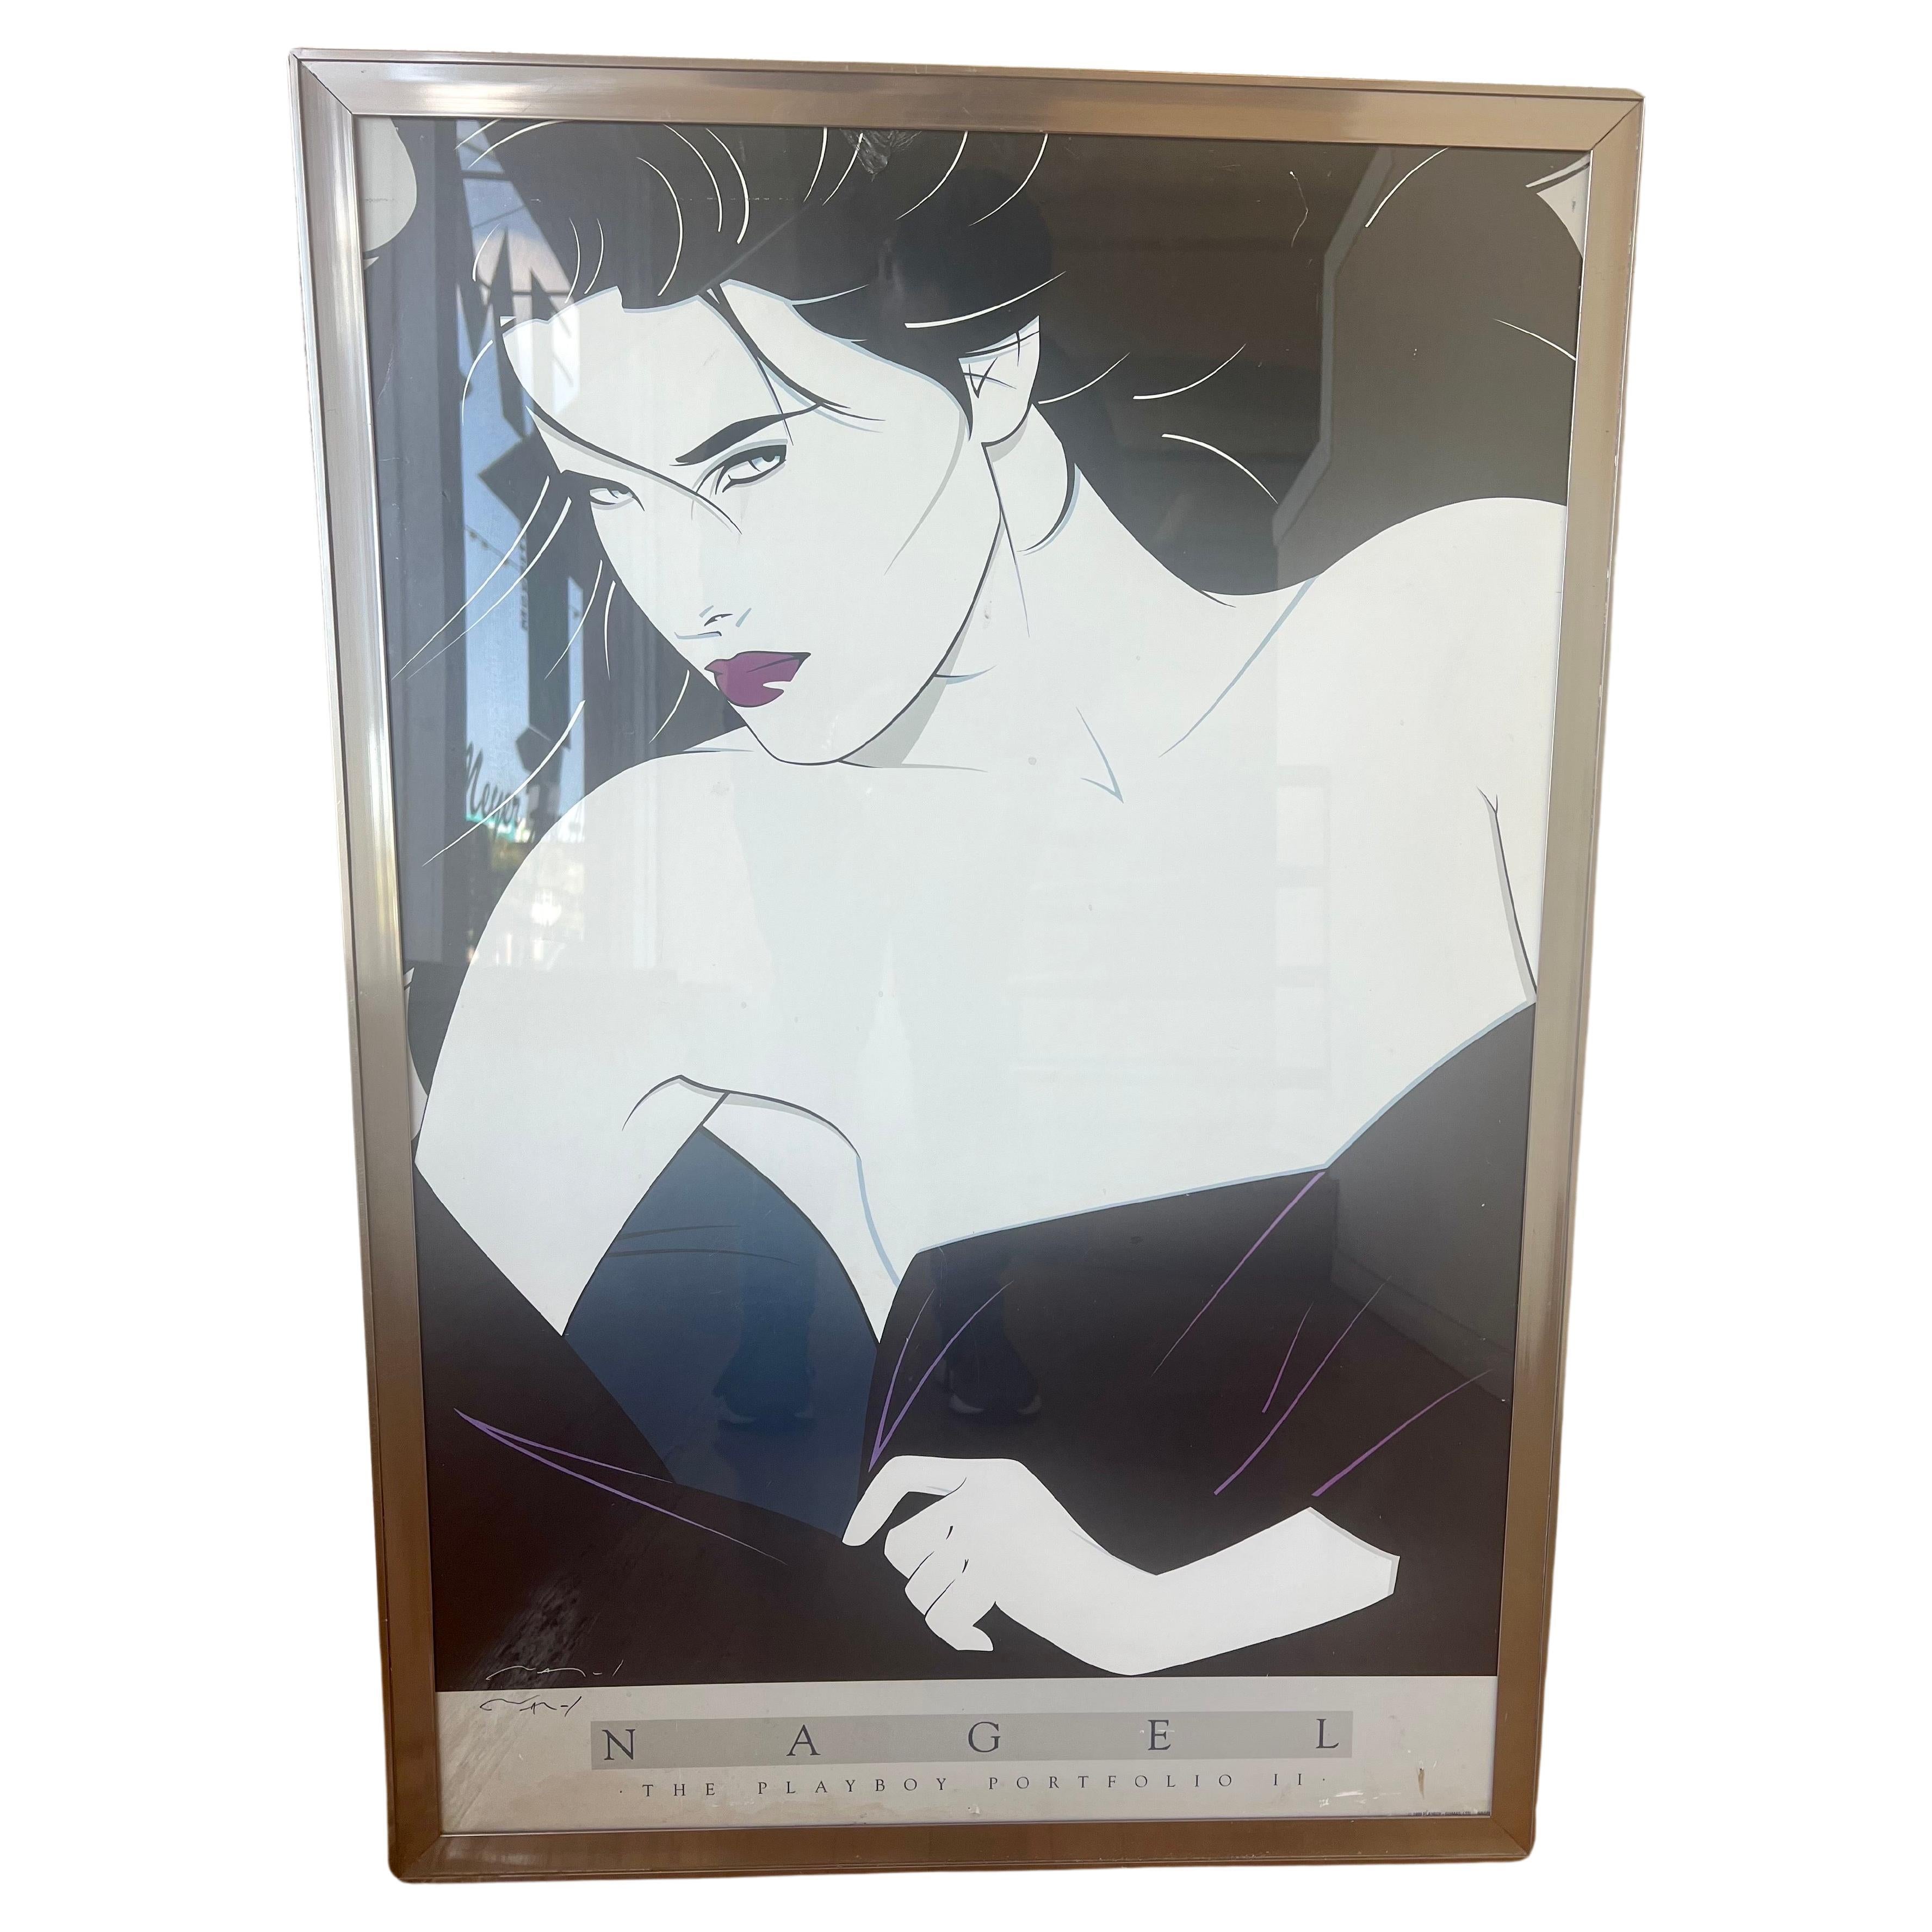 1989 rare framed poster for Playboy portfolio signed in the back and dated 1989, printed in cardboard framed, these pieces are more rare and collectible we removed the frame and cleaned it the poster shows some wear and damage on the top as shown if